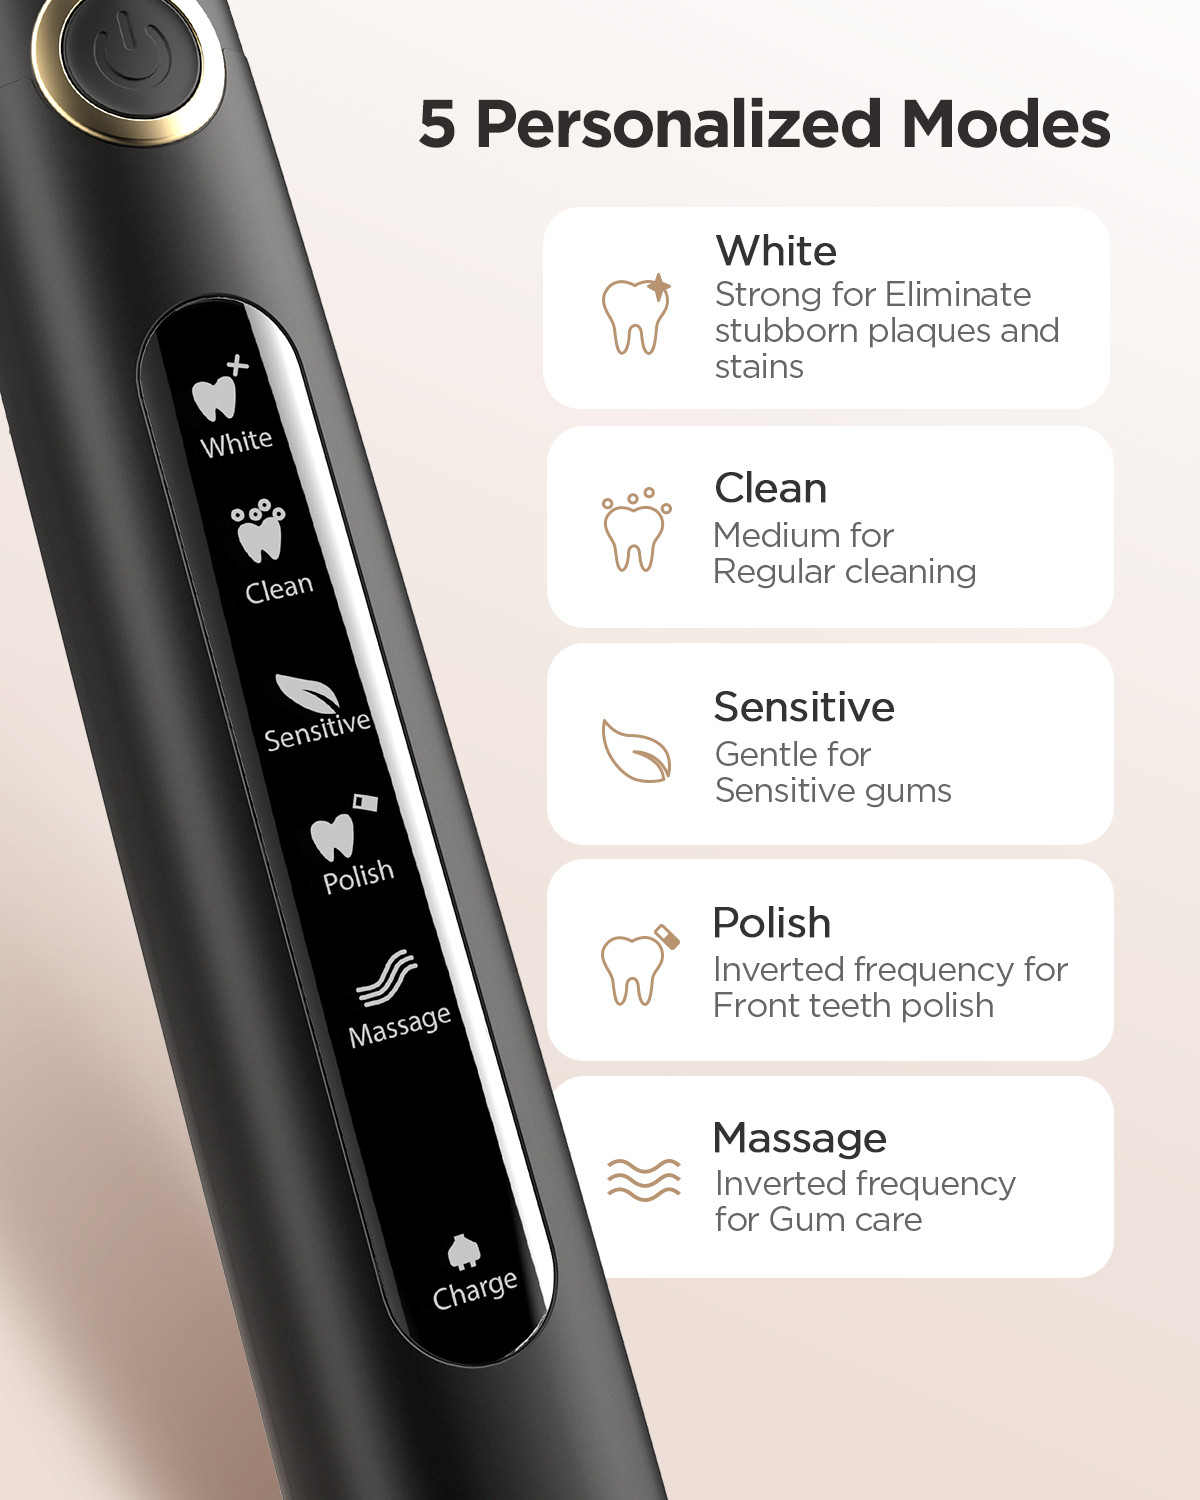 Fairywill Sonic Electric Toothbrush, Rechargeable Power Toothrush with 4 Brush Heads, 5 Modes and 2 Minutes Build in Smart Timer, Black - image 4 of 9